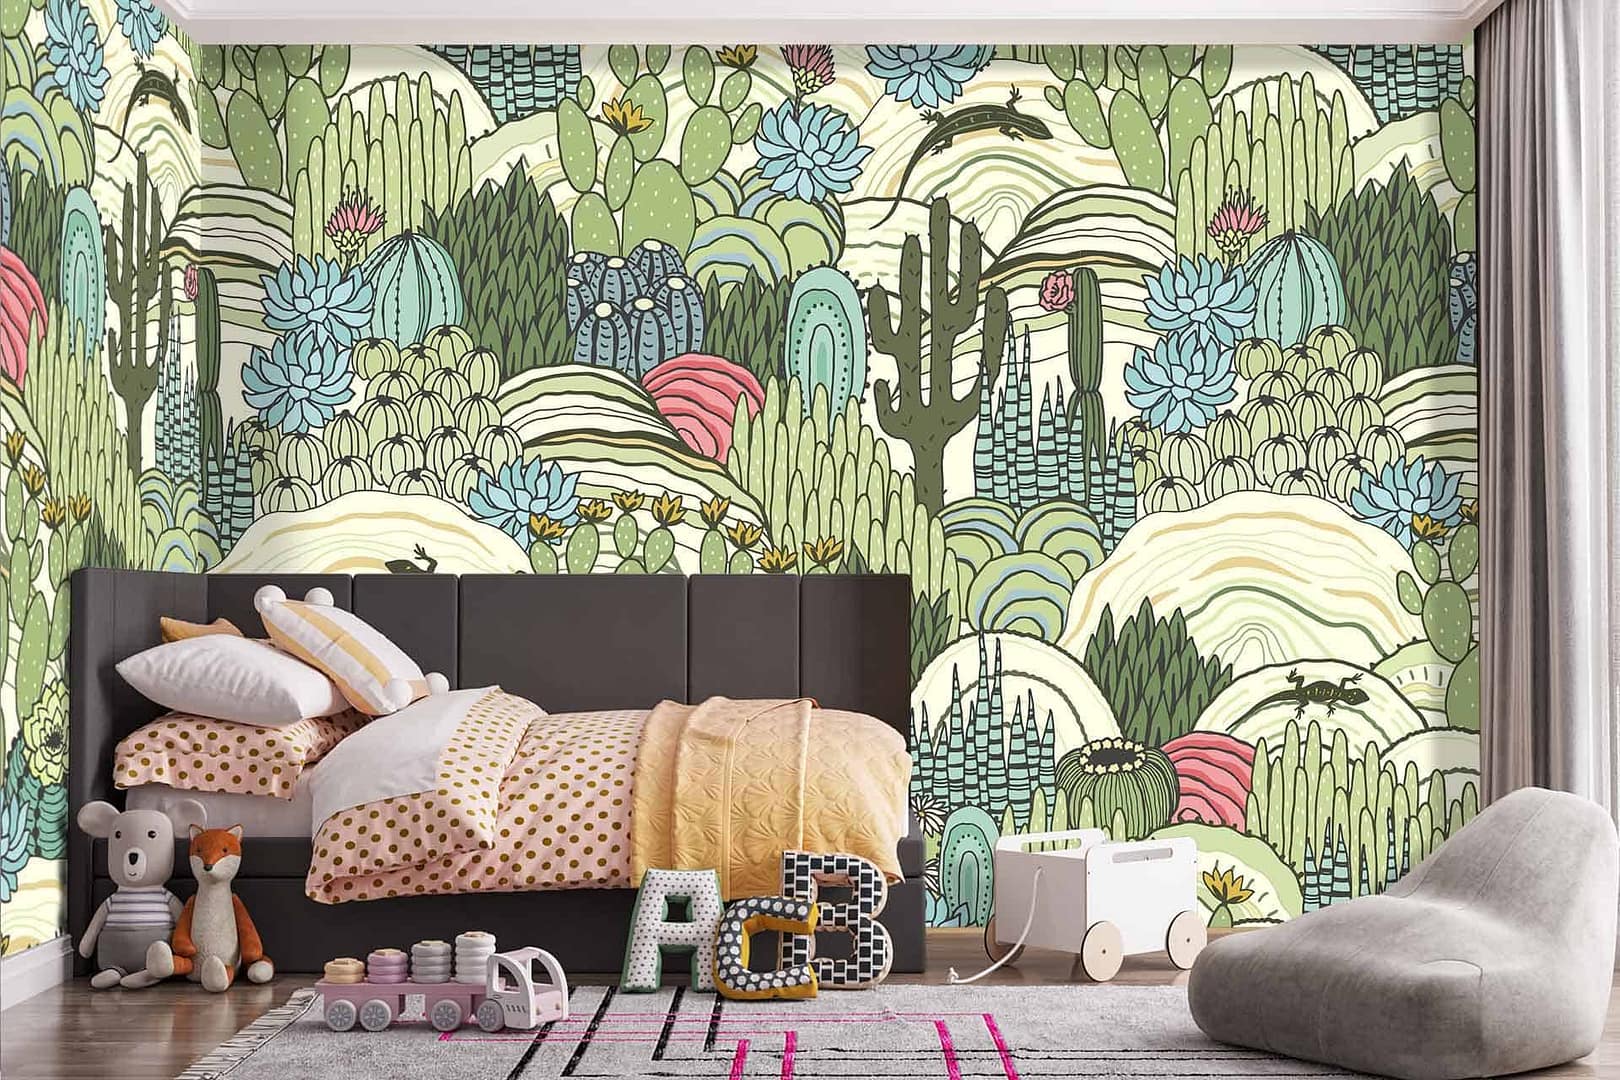 Sunshine State - a wallpaper made of graphic cacti, rocks and lizards by Cara Saven Wall Design